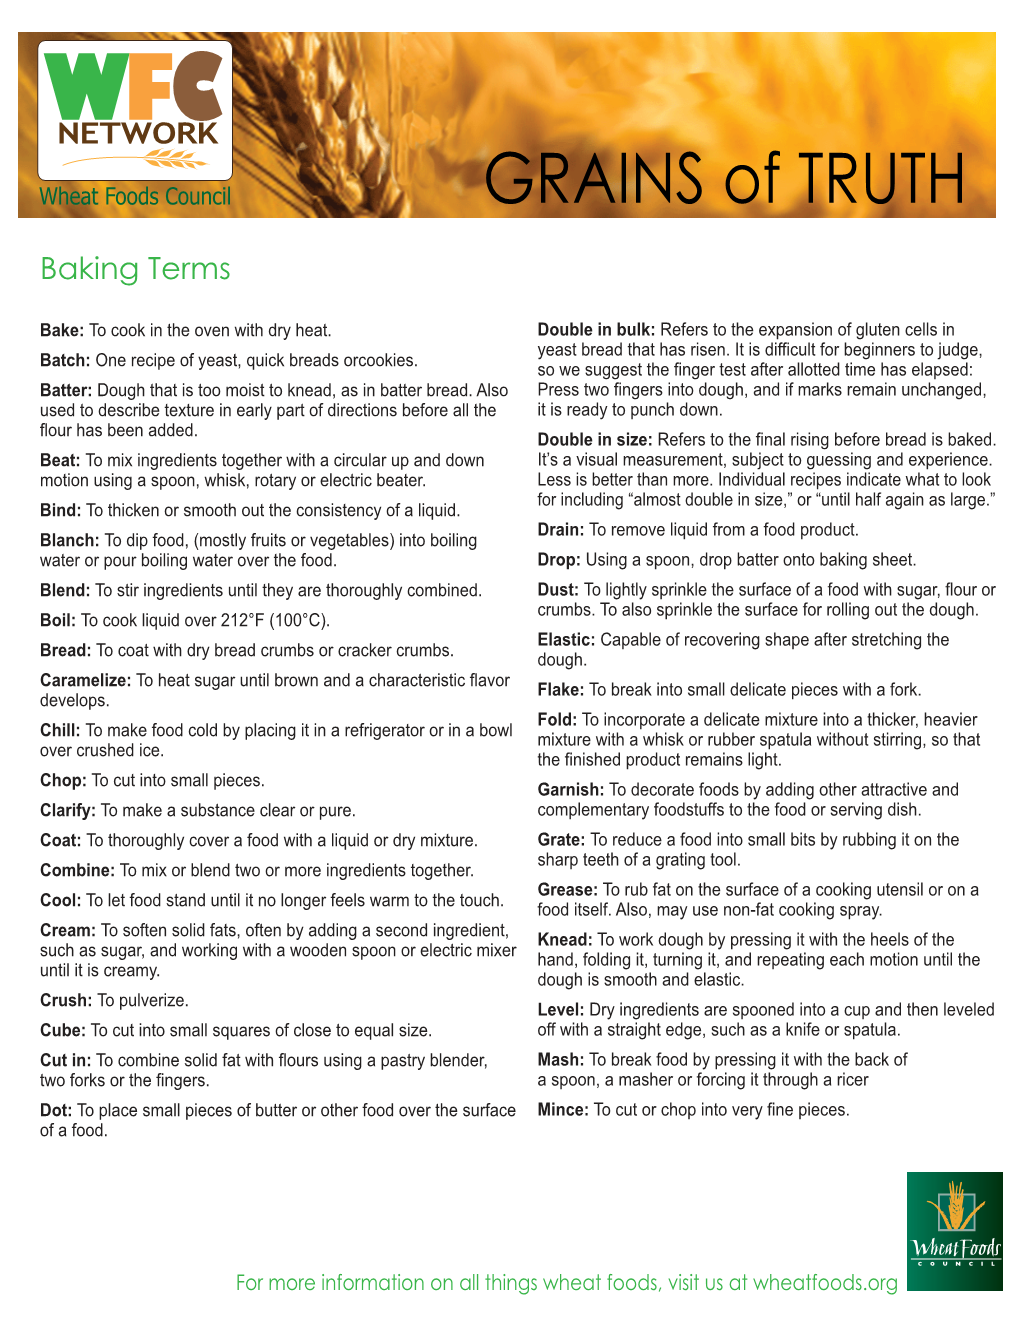 Grains of Truth- Baking Terms